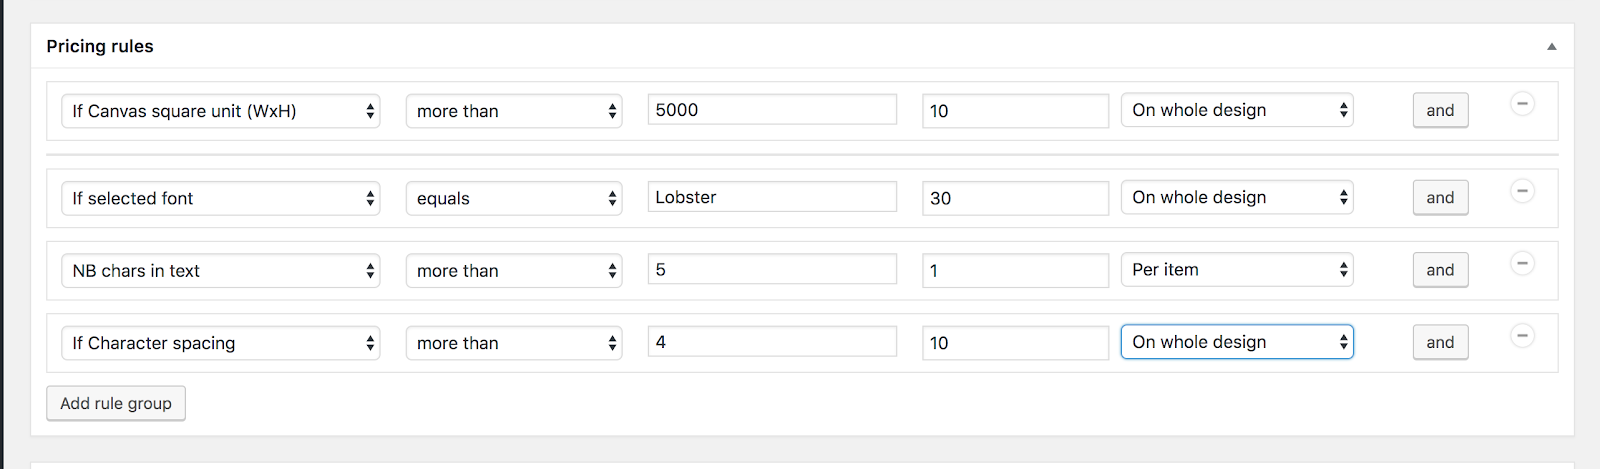 pricing table 1